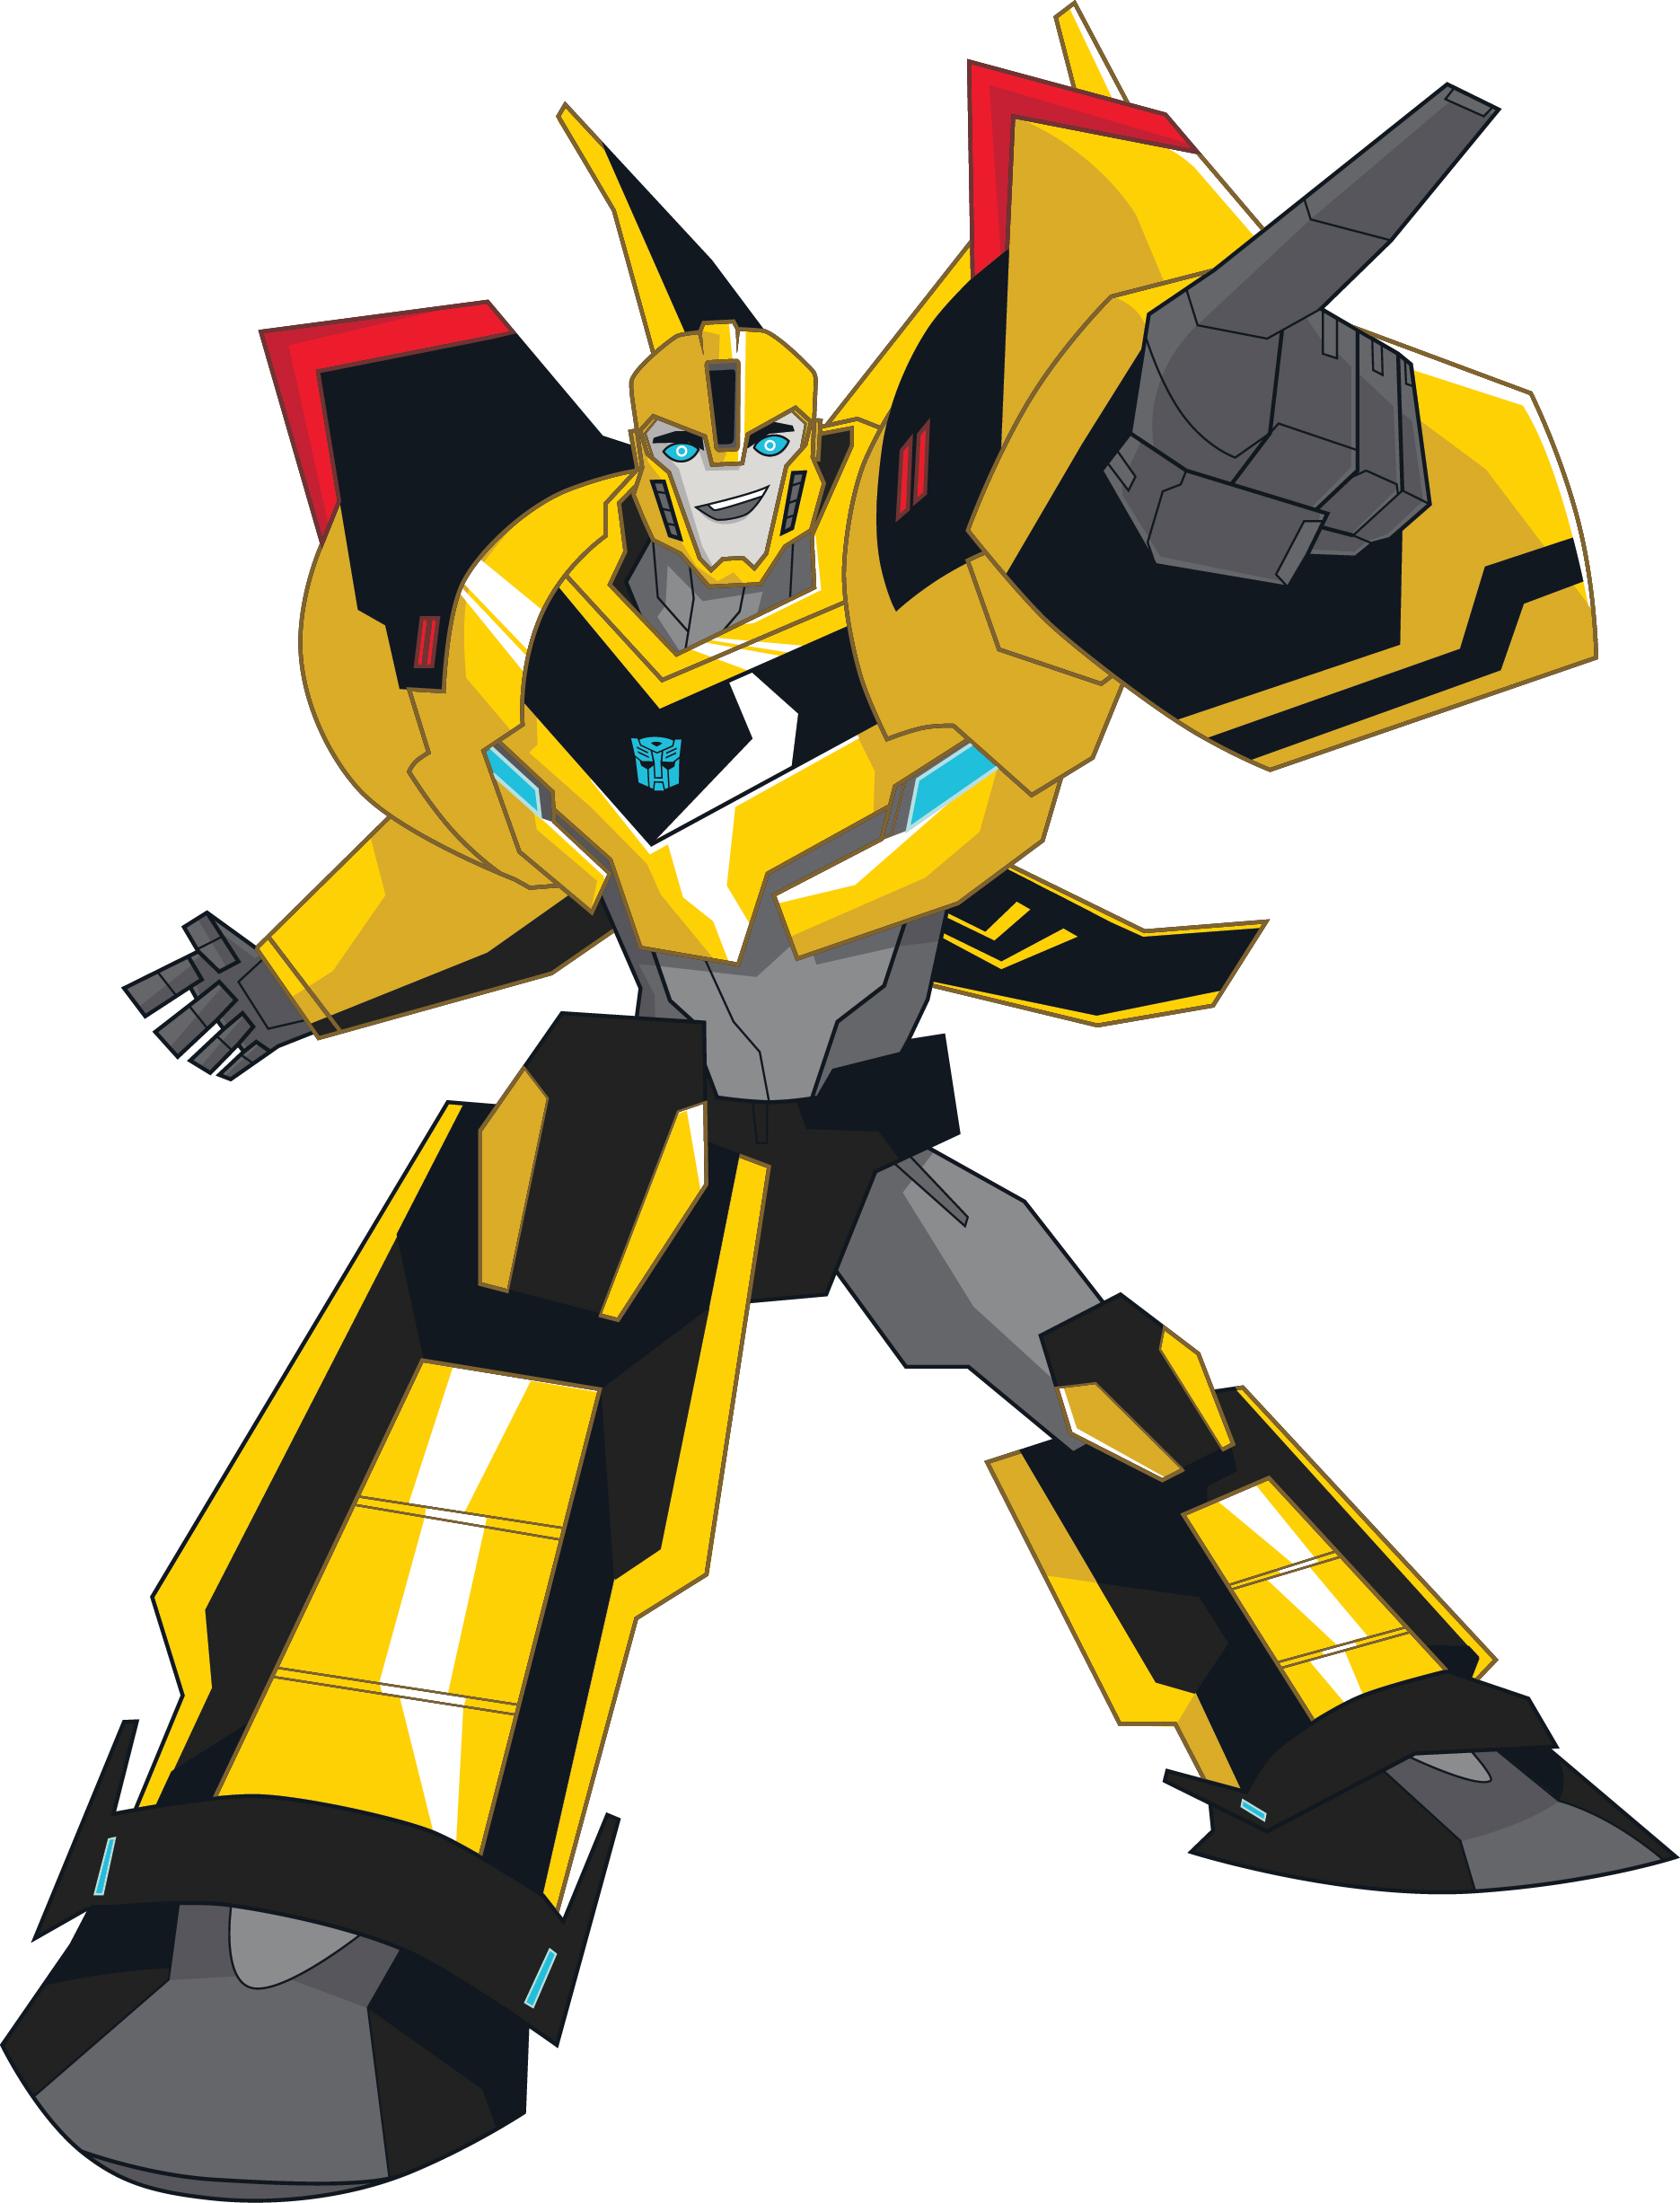 Next Transformers Animated .